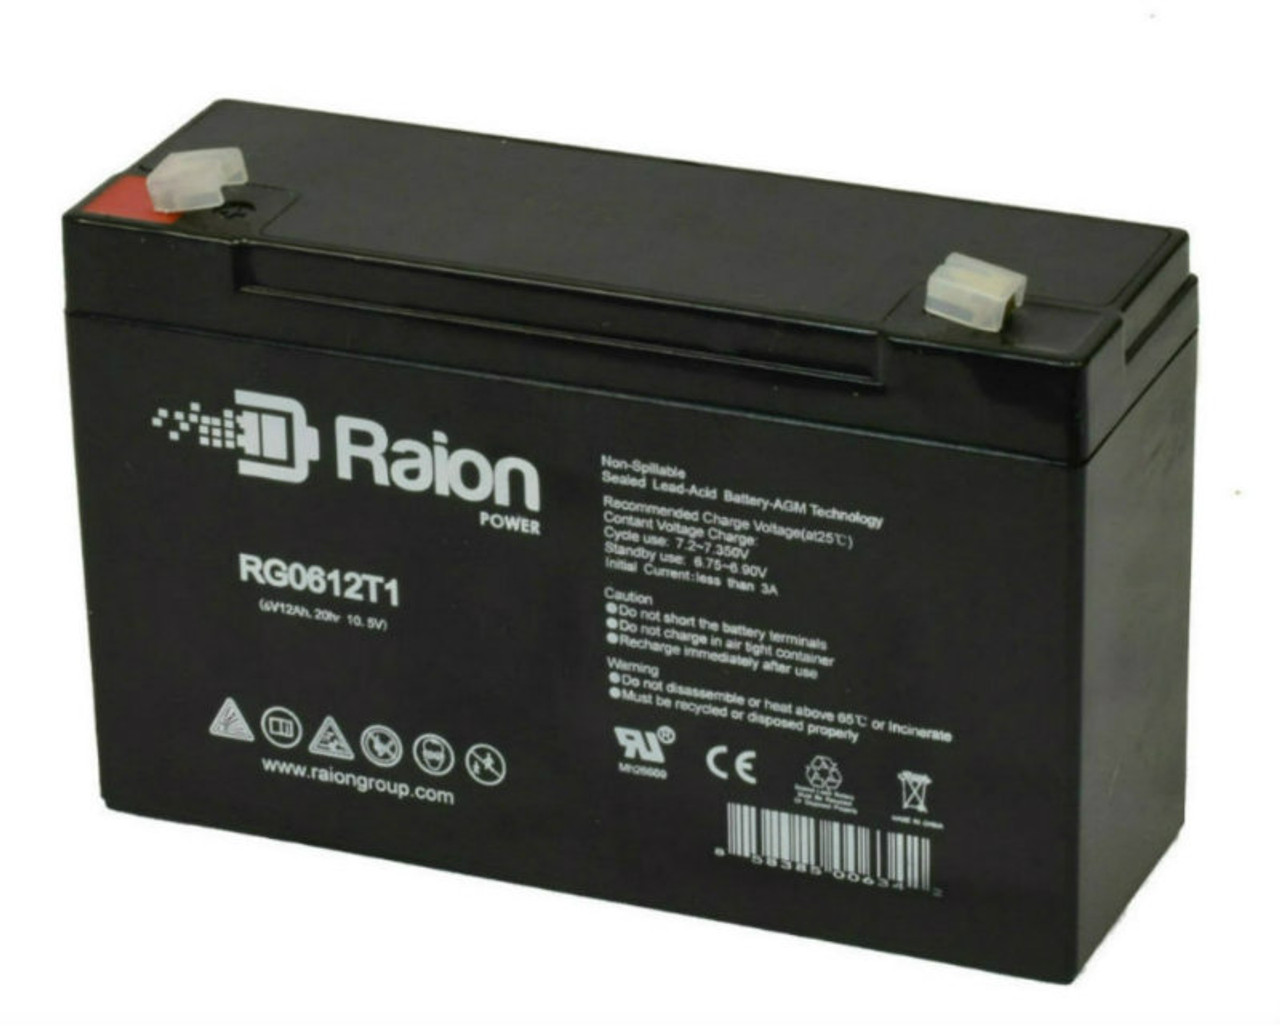 Raion Power RG06120T1 Replacement Emergency Light Battery for Edwards 1628